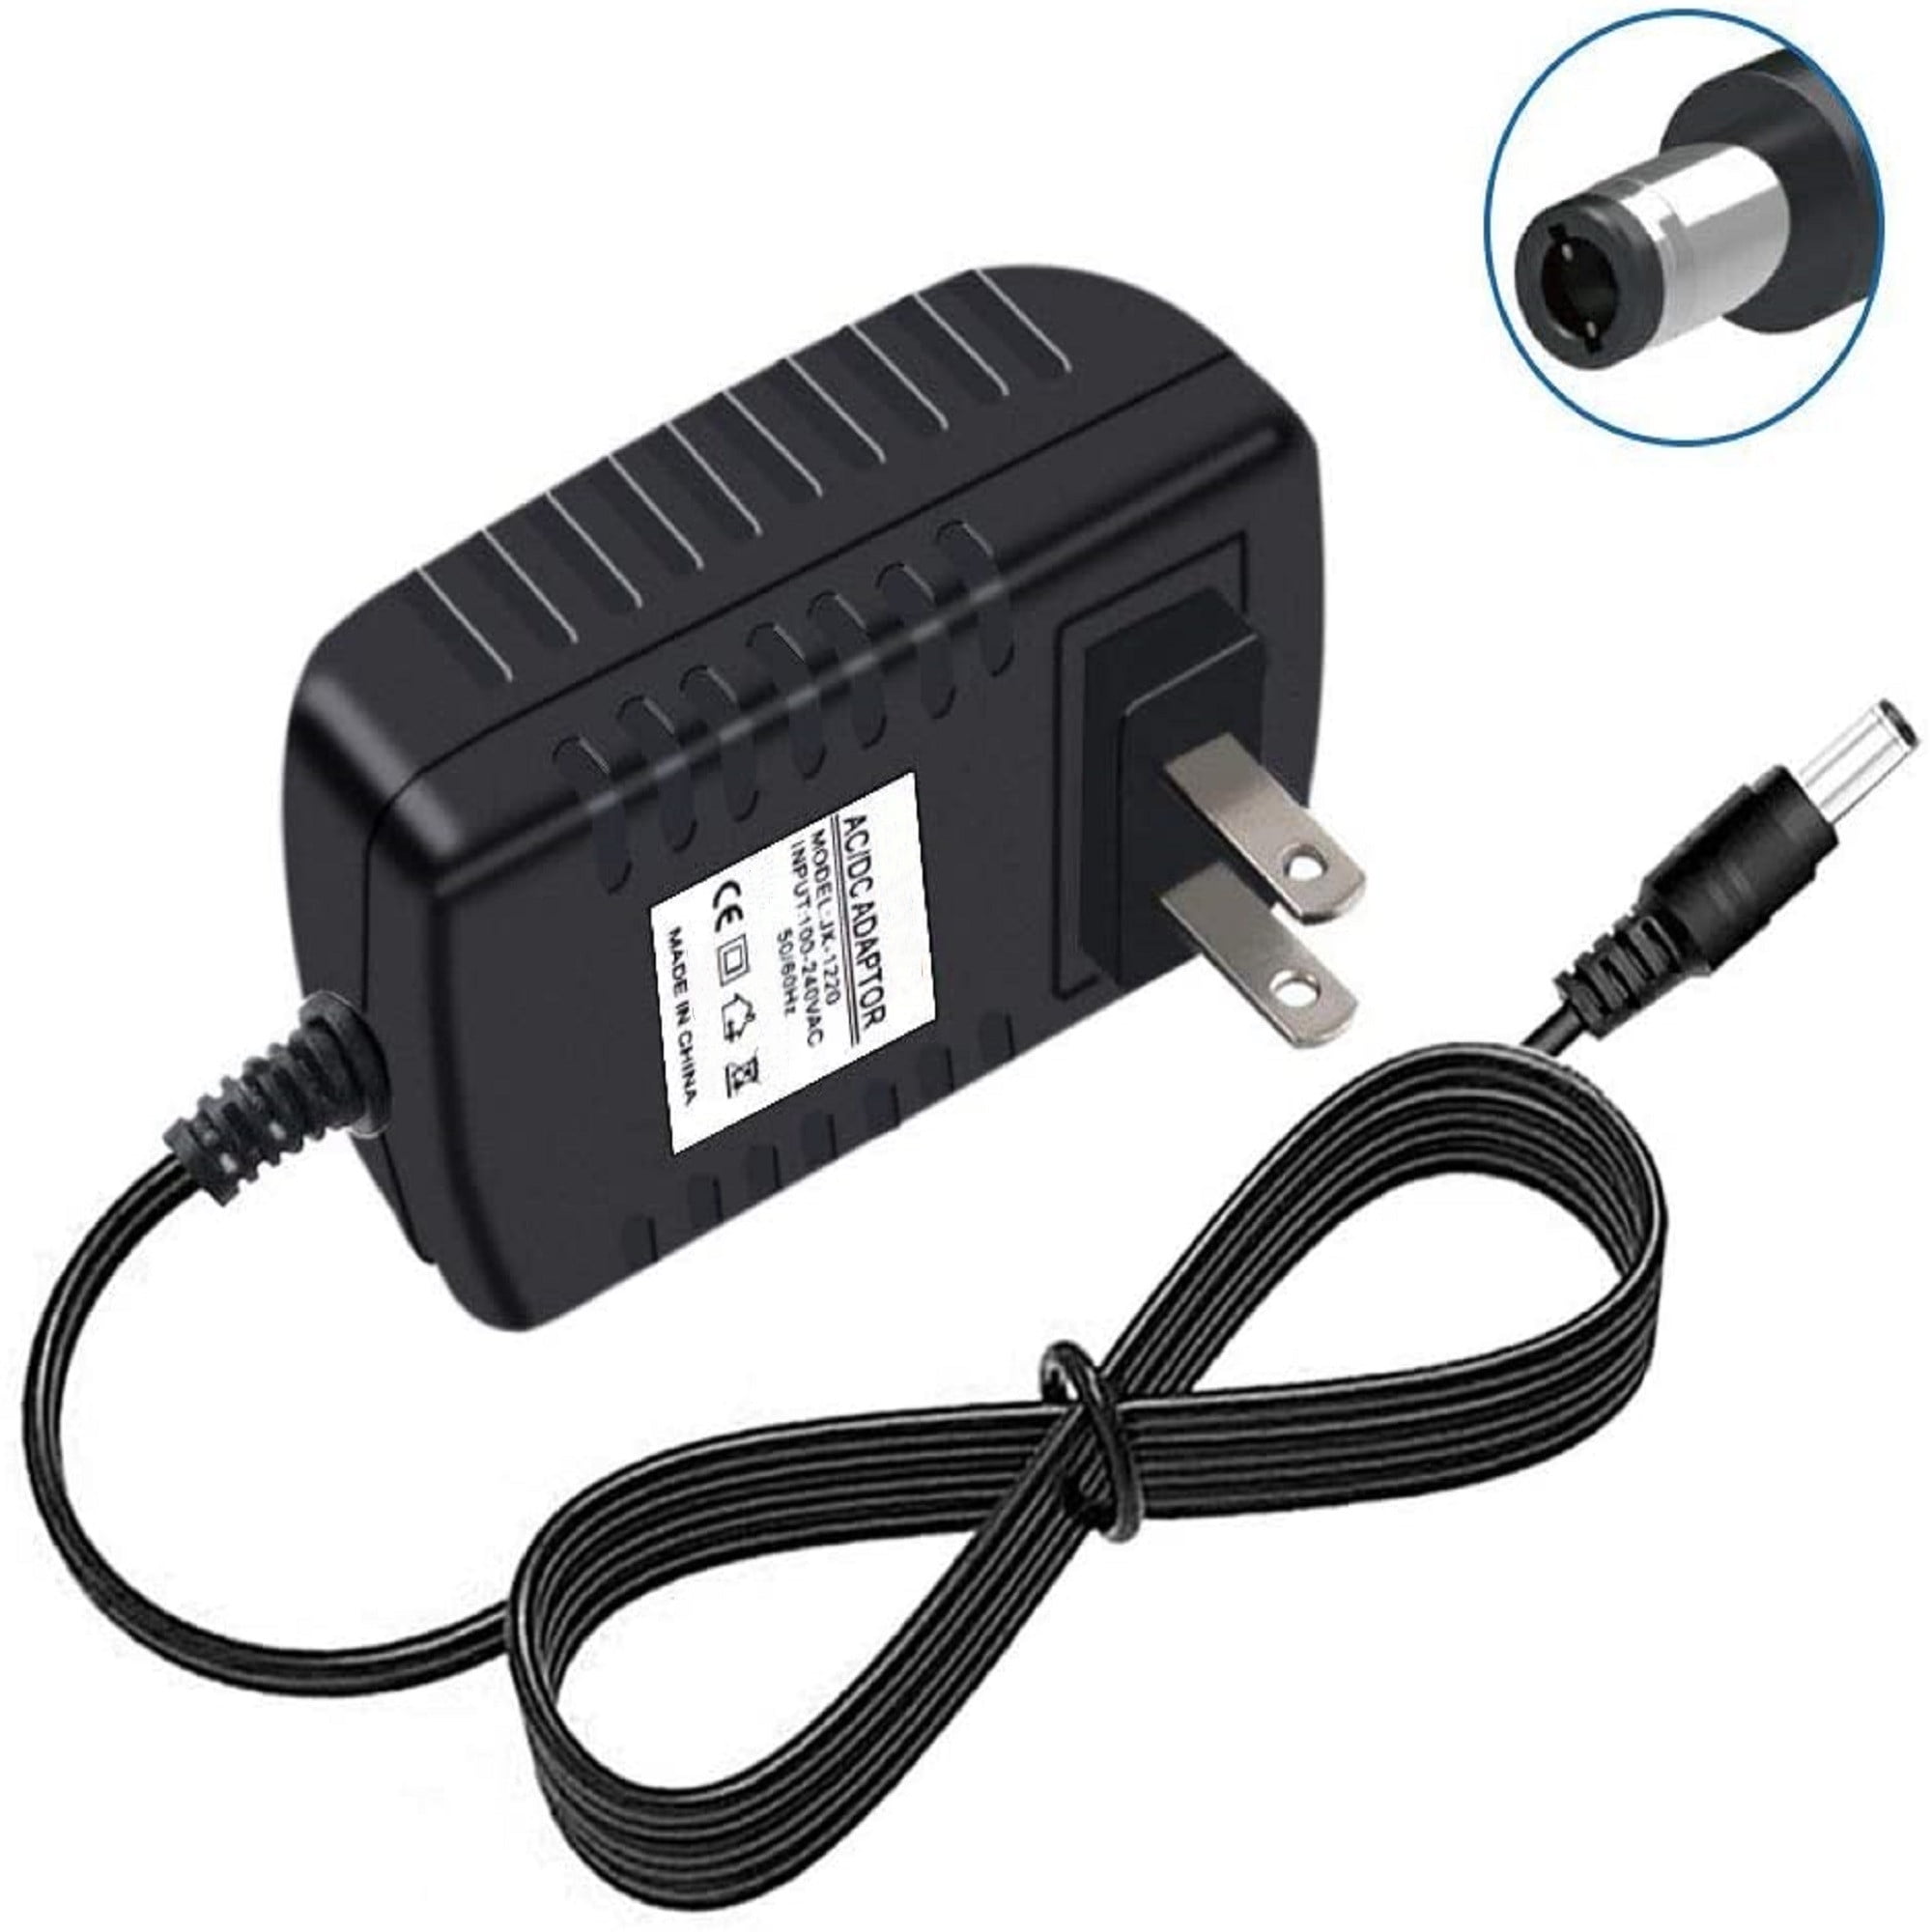 12V AC Adapter For Panasonic BB-HCM311A BBHCM311A Network Camera WebCam Charger 